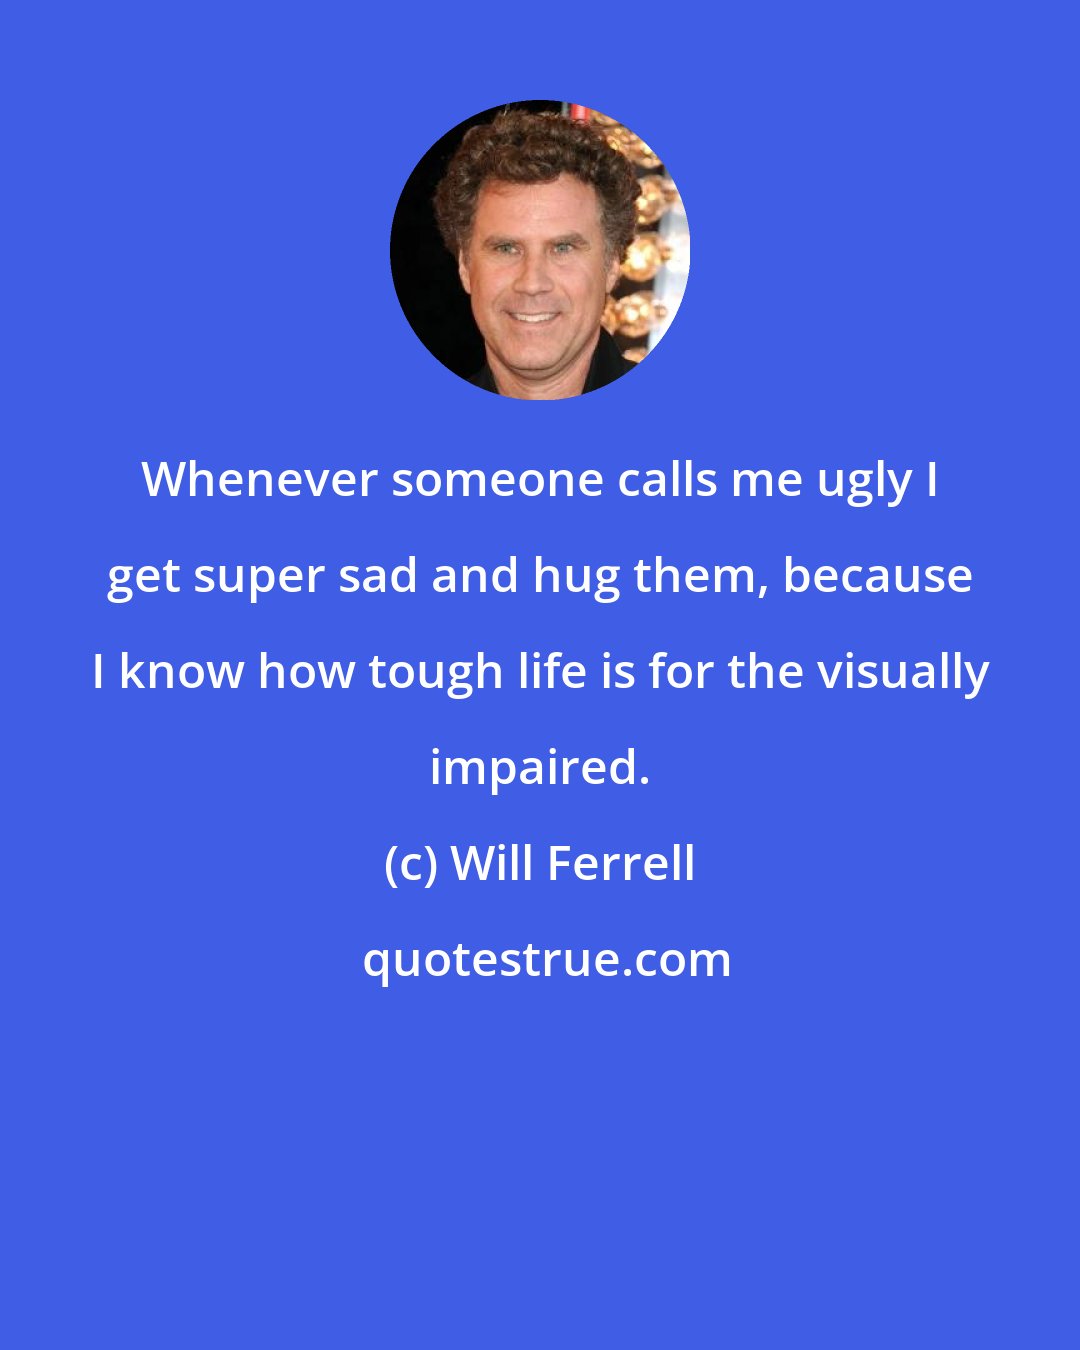 Will Ferrell: Whenever someone calls me ugly I get super sad and hug them, because I know how tough life is for the visually impaired.